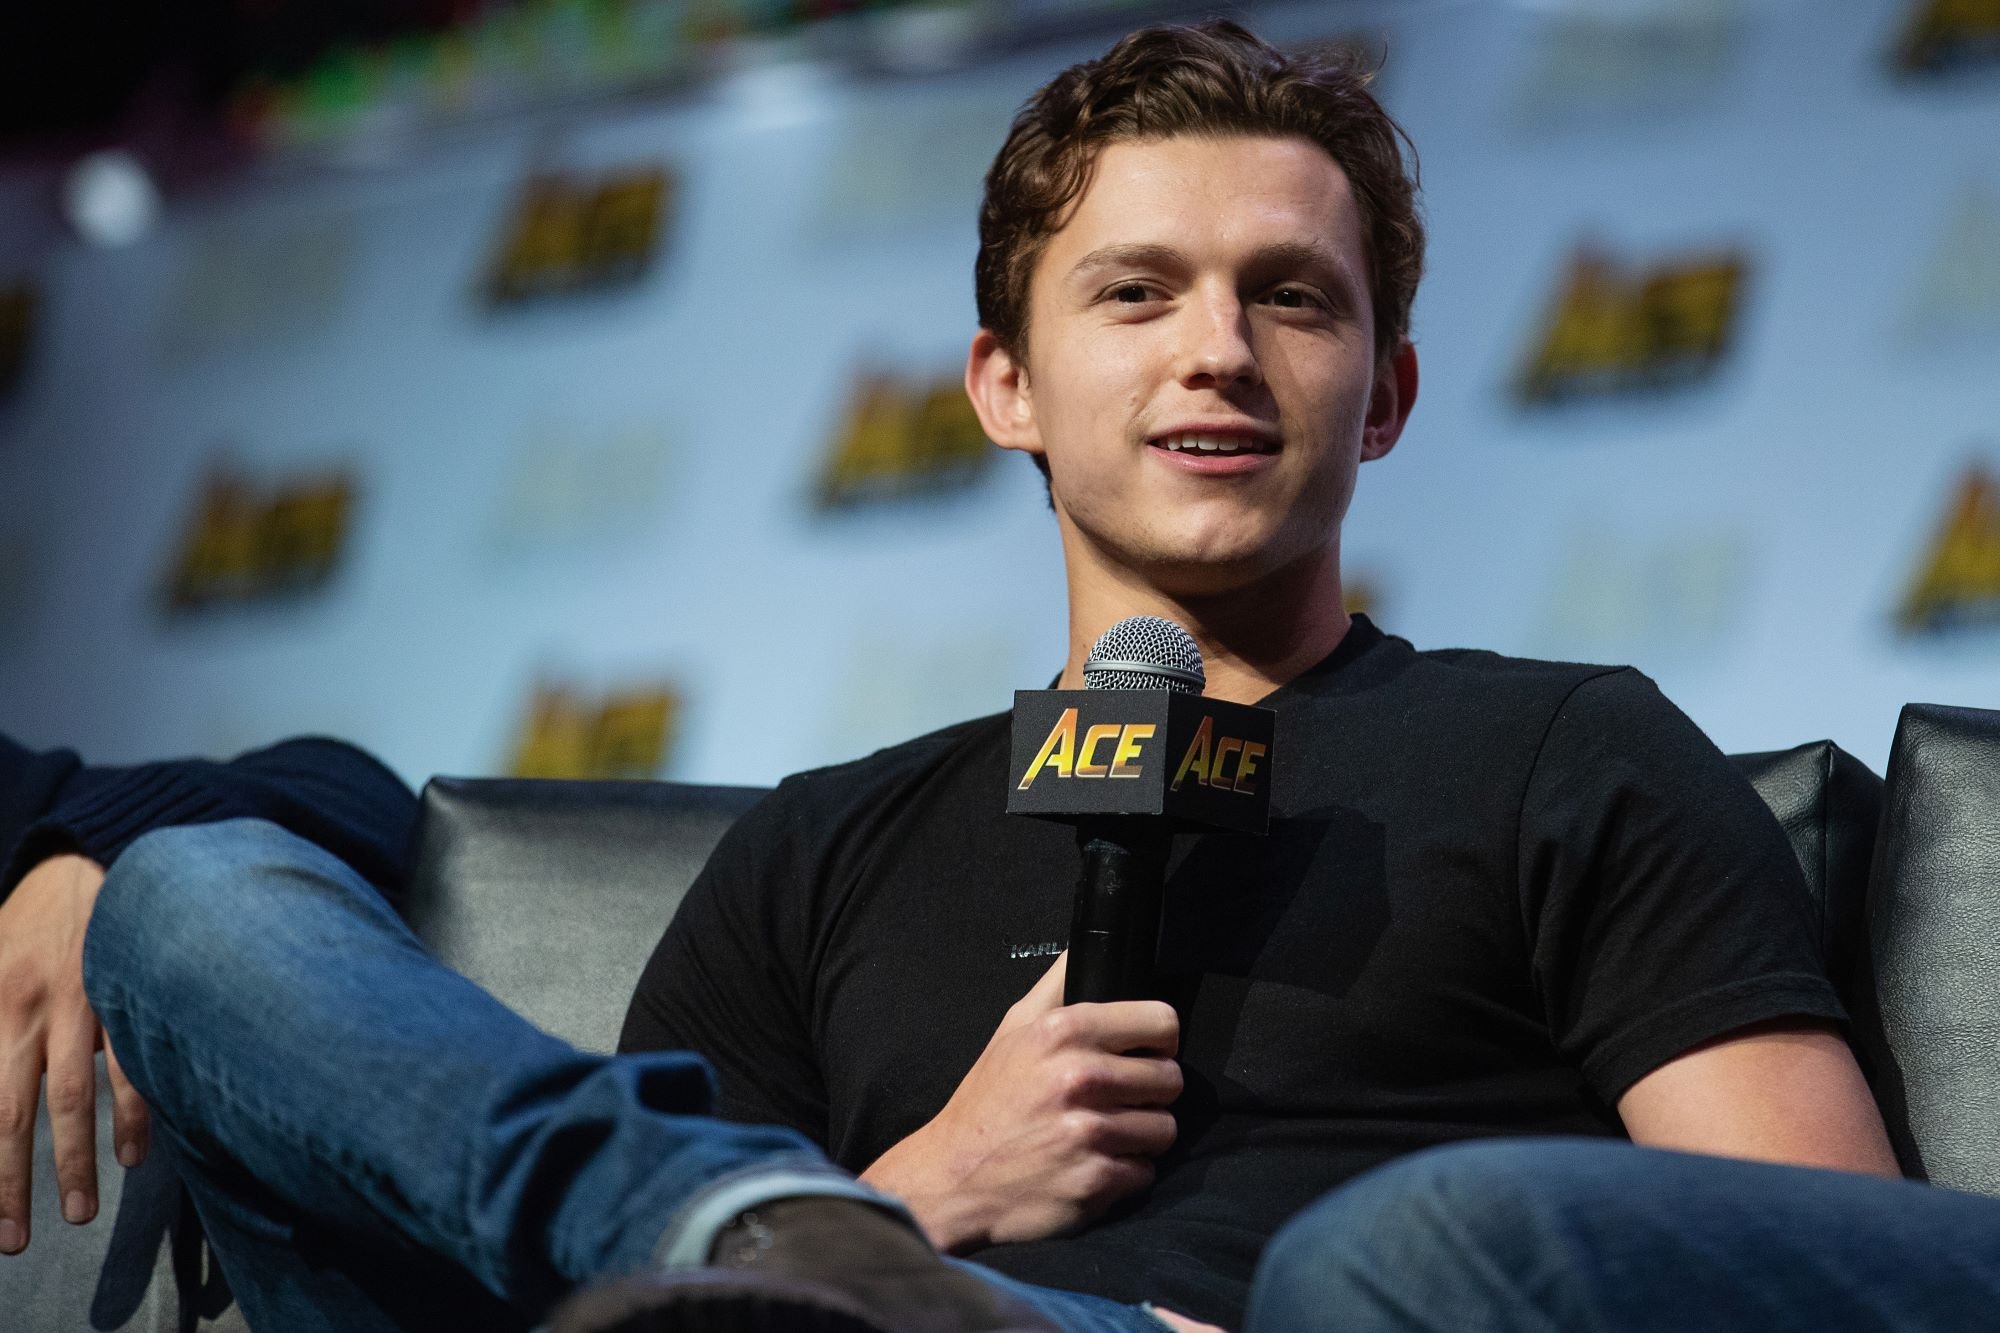 'Spider-Man: No Way Home' star Tom Holland wears a black shirt and jeans. Holland starred alongside Chris Evans in 'Captain America: Civil War.'